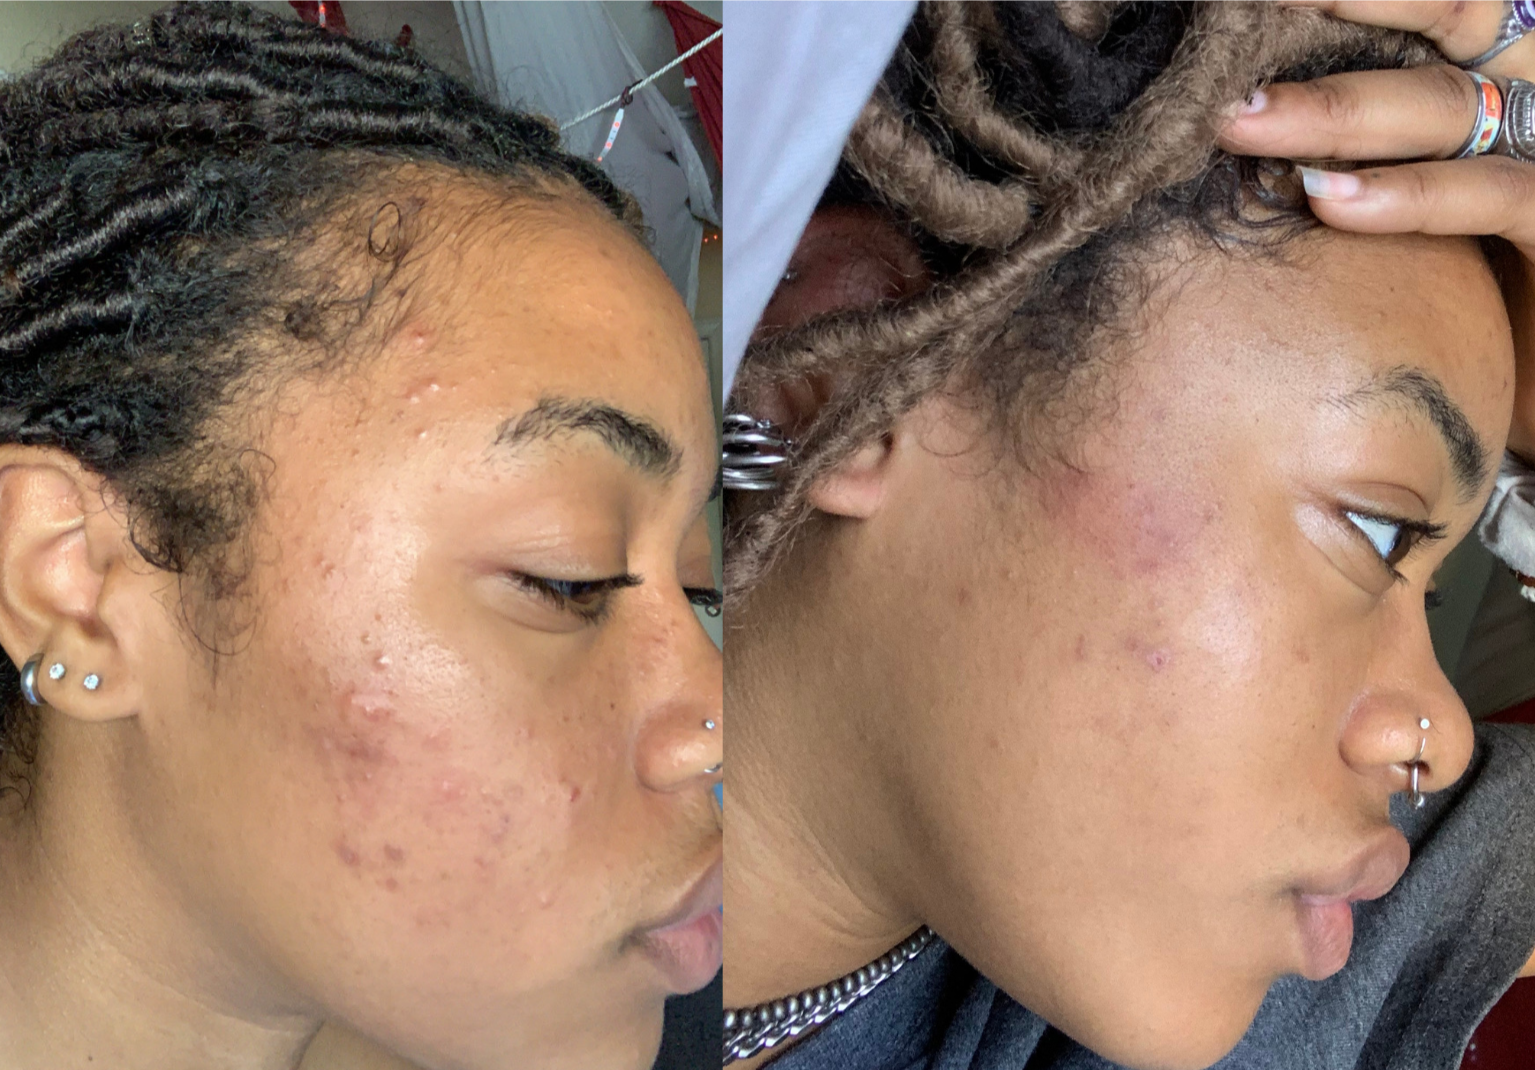 Before and after of a female client having more clear skin due to her usage of the turmeric soap